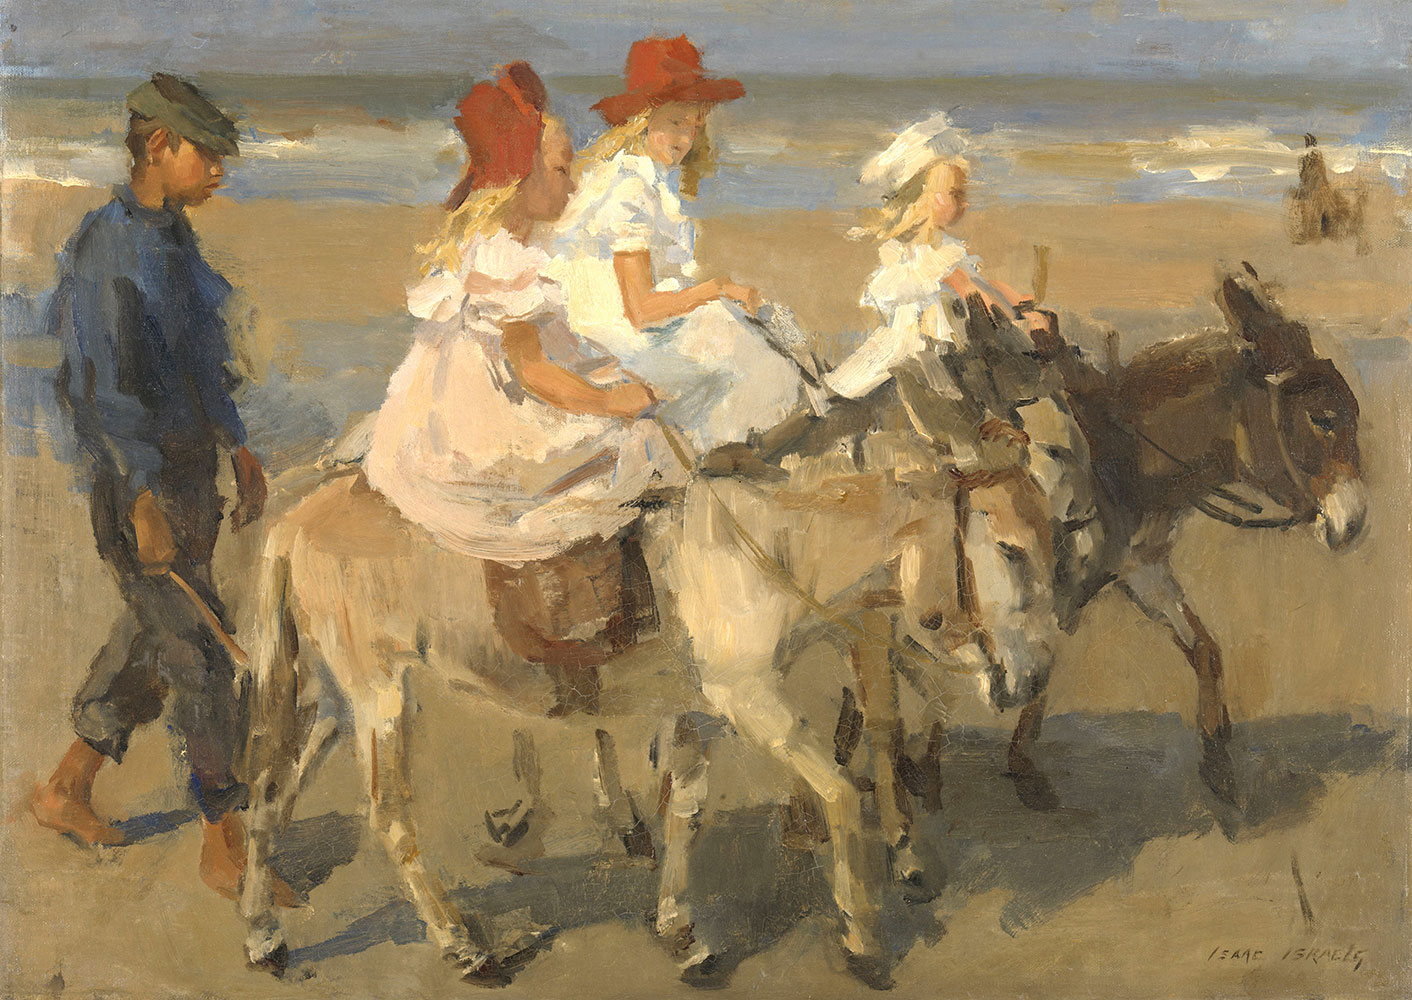 Wall Painters Israels Isaac Riding a Donkey Along the Beach